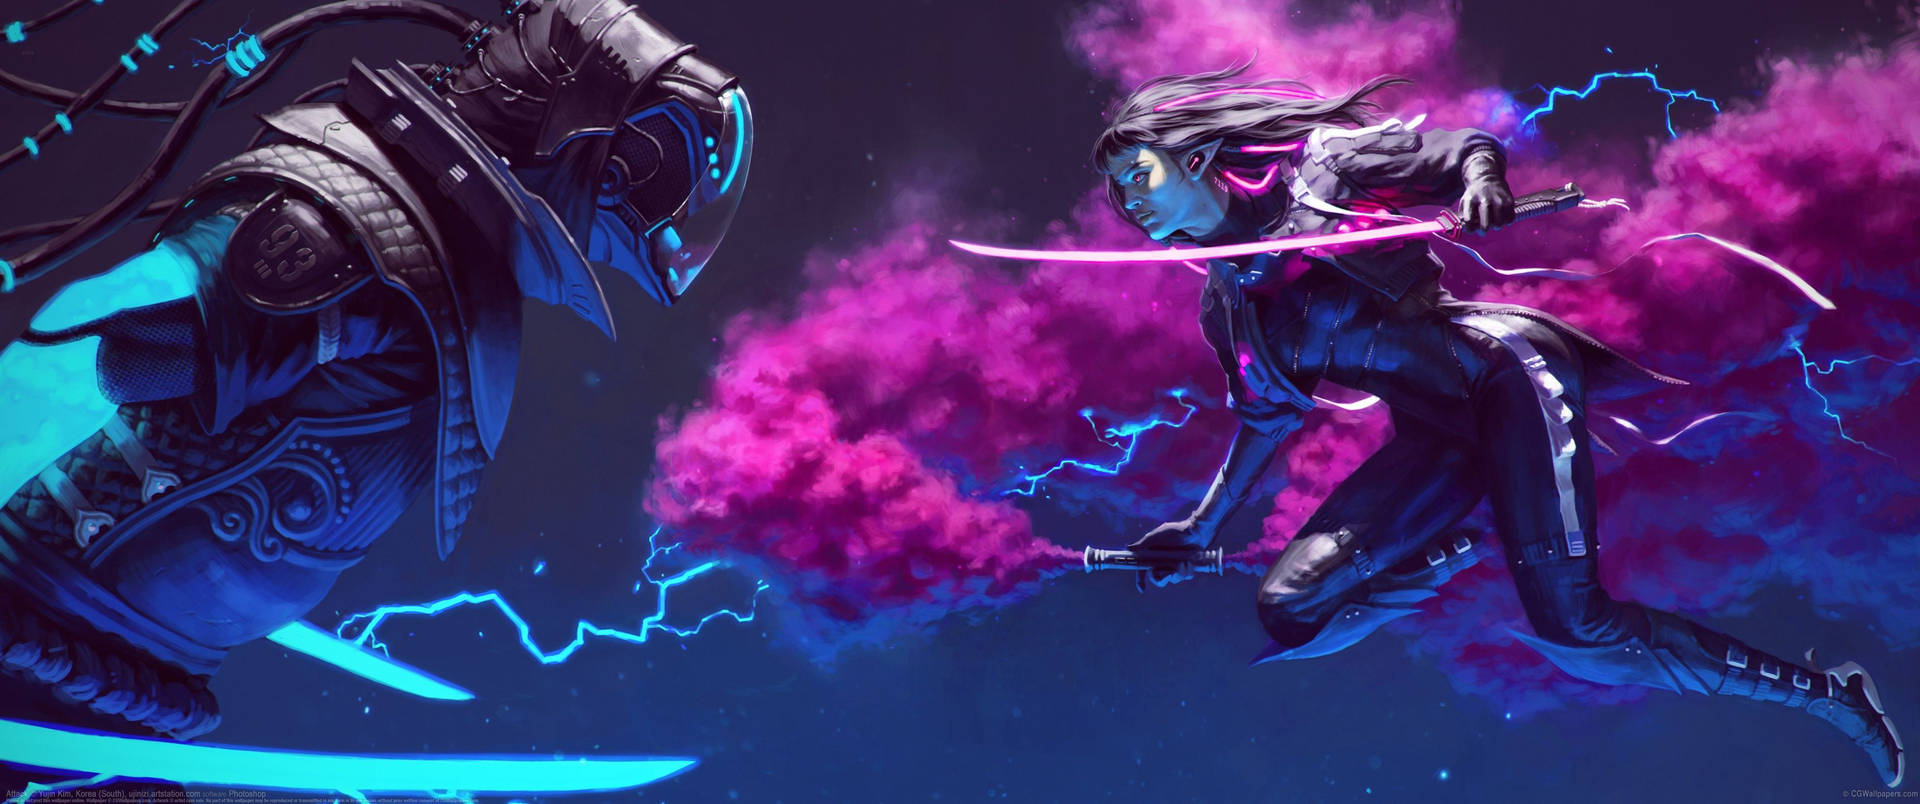 Ultrawide purple woman and smoke and a masked man floating in sky.